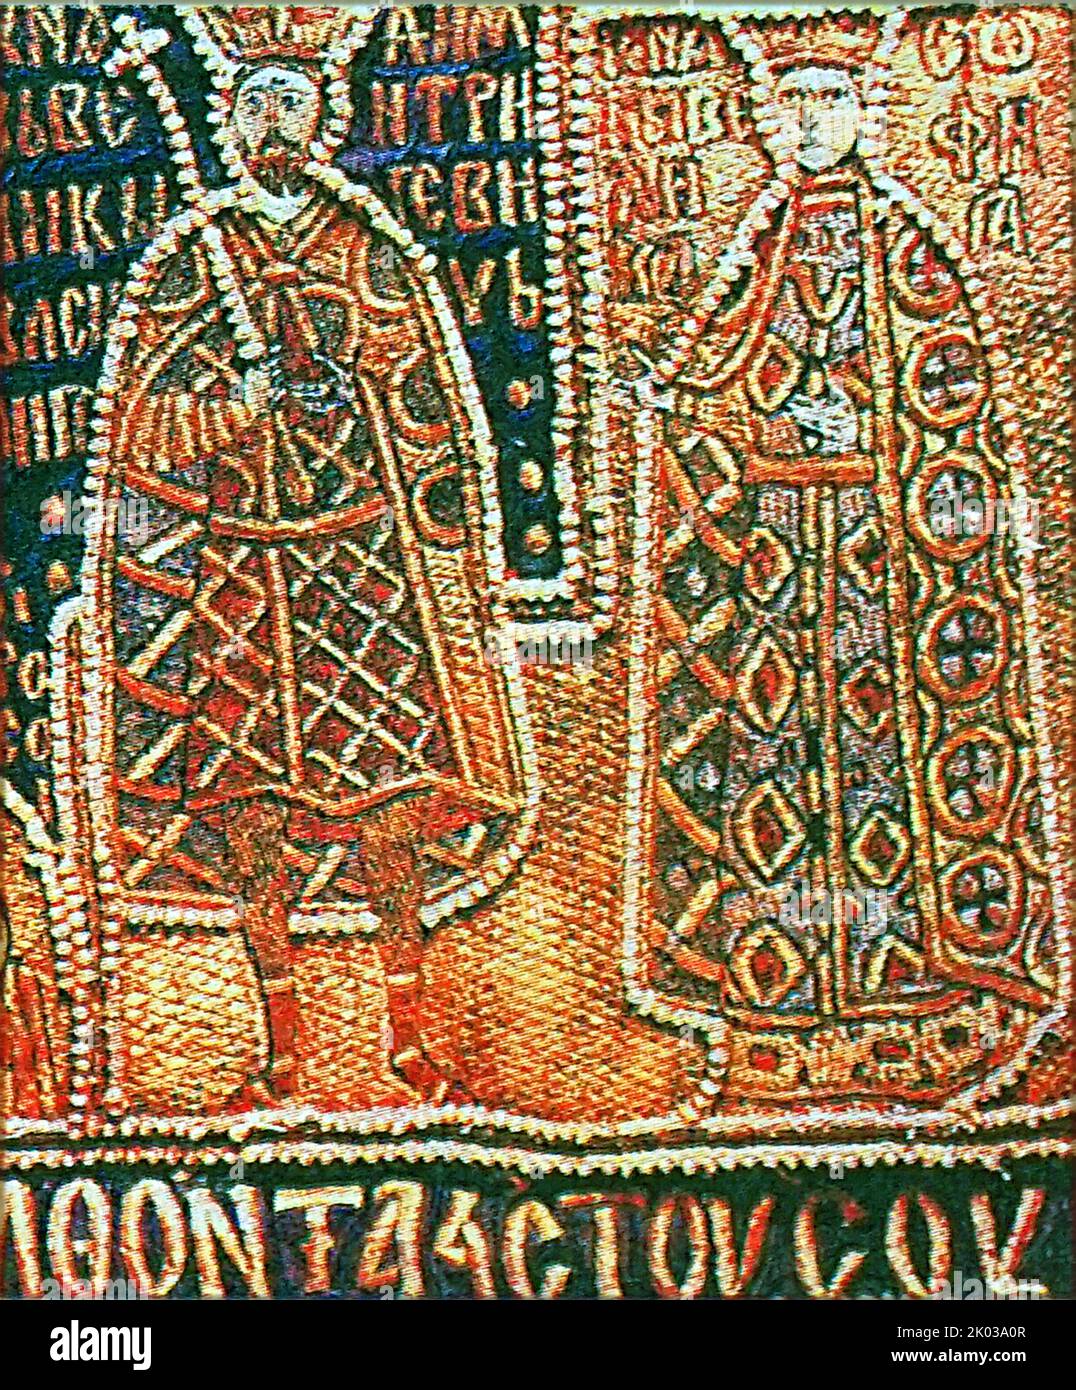 Vasily I of Moscow and Sophia of Lithuania. Vasily I Dmitriyevich (1371 - 1425) was the Grand Prince of Moscow (r. 1389--1425), He had entered an alliance with the Grand Duchy of Lithuania in 1392 and married the only daughter of Vytautas the Great, Sophia Stock Photo